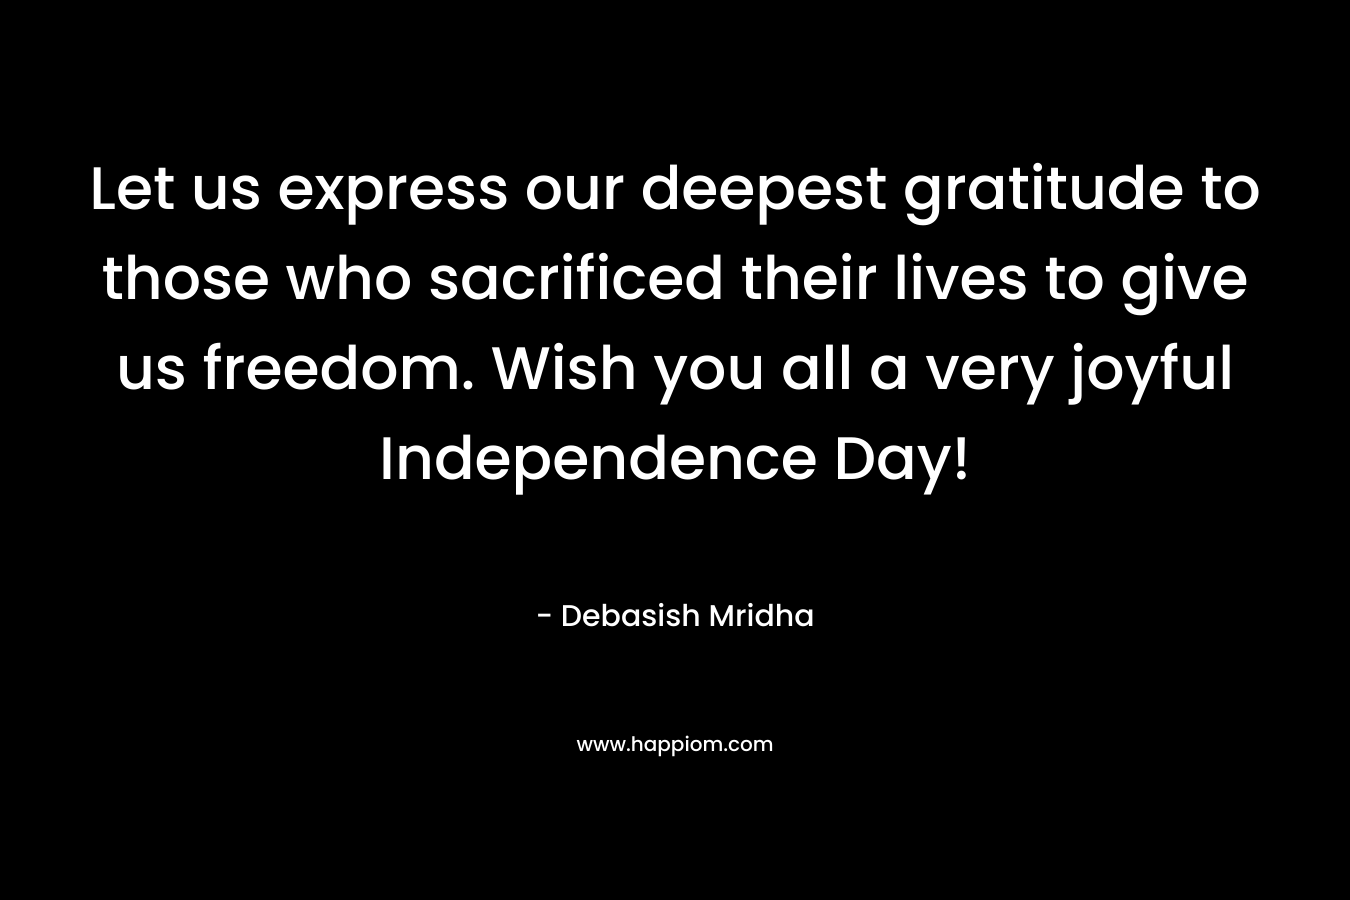 Let us express our deepest gratitude to those who sacrificed their lives to give us freedom. Wish you all a very joyful Independence Day!